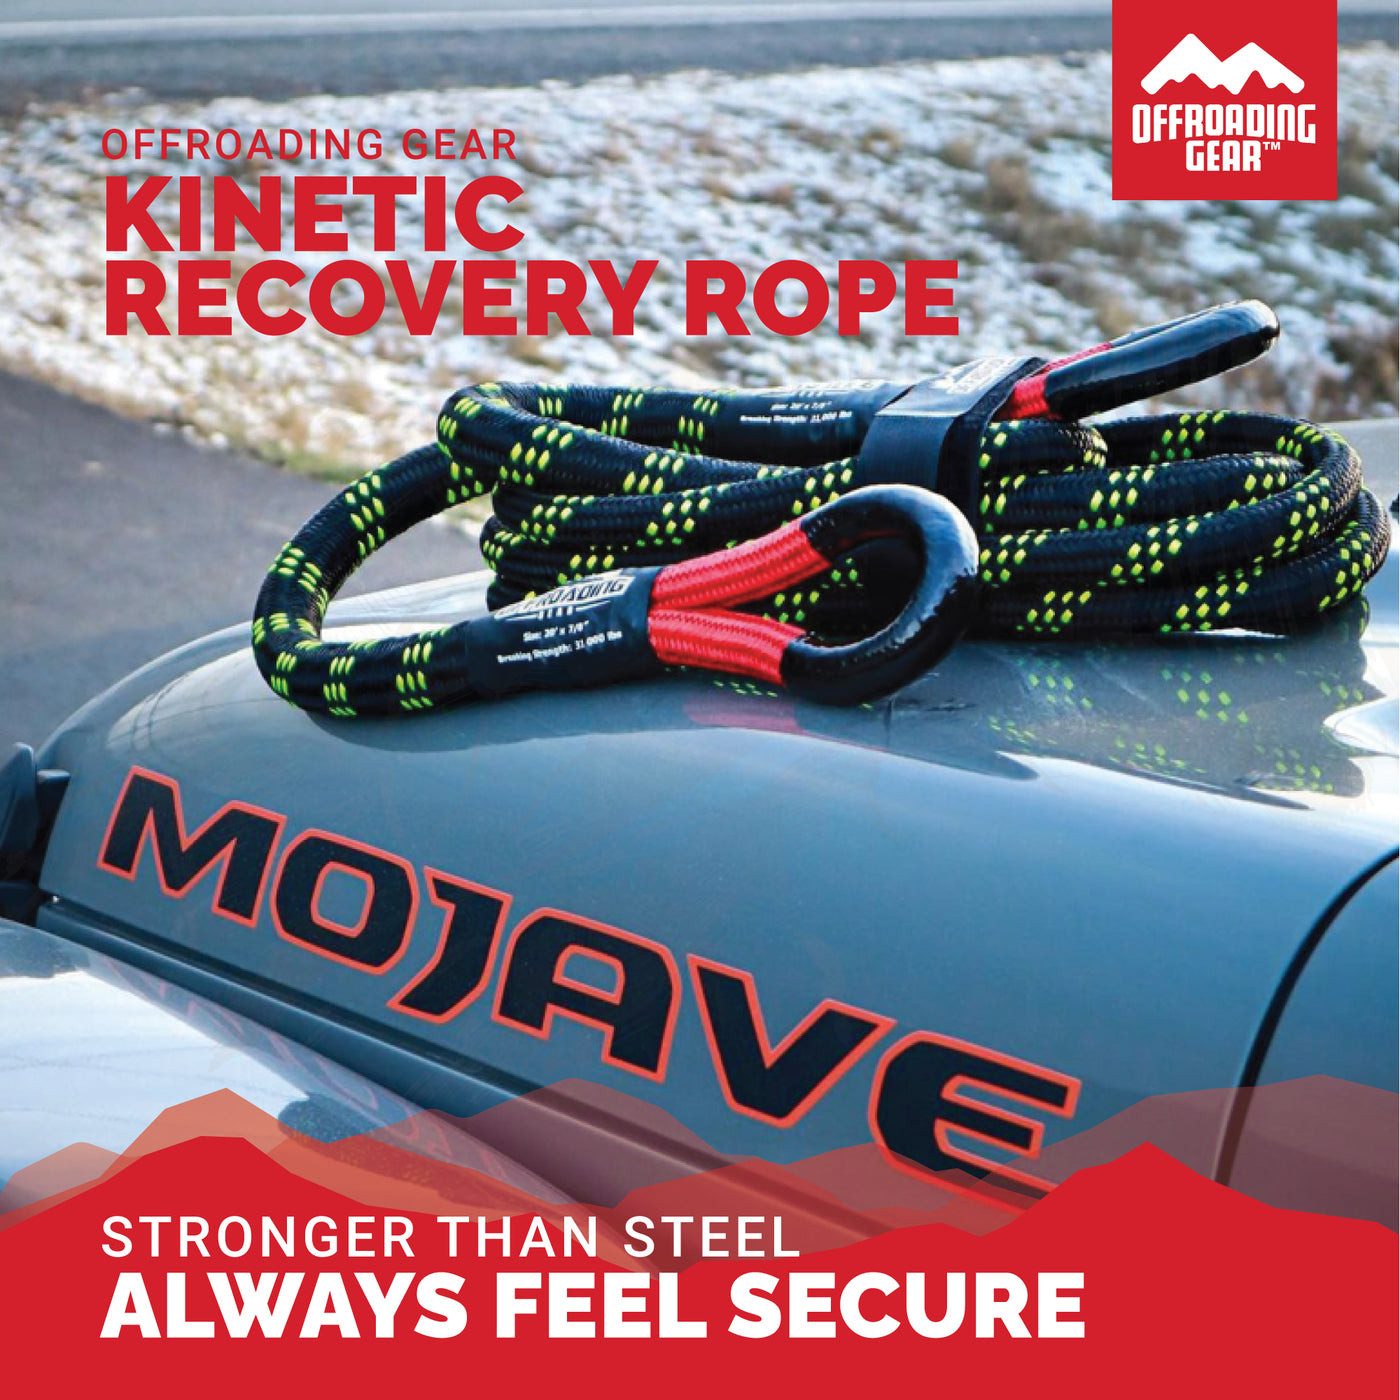 Offroading Gear Kinetic Recovery & Tow Rope | Elastic Snatch Strap | Heavy Duty Loops |